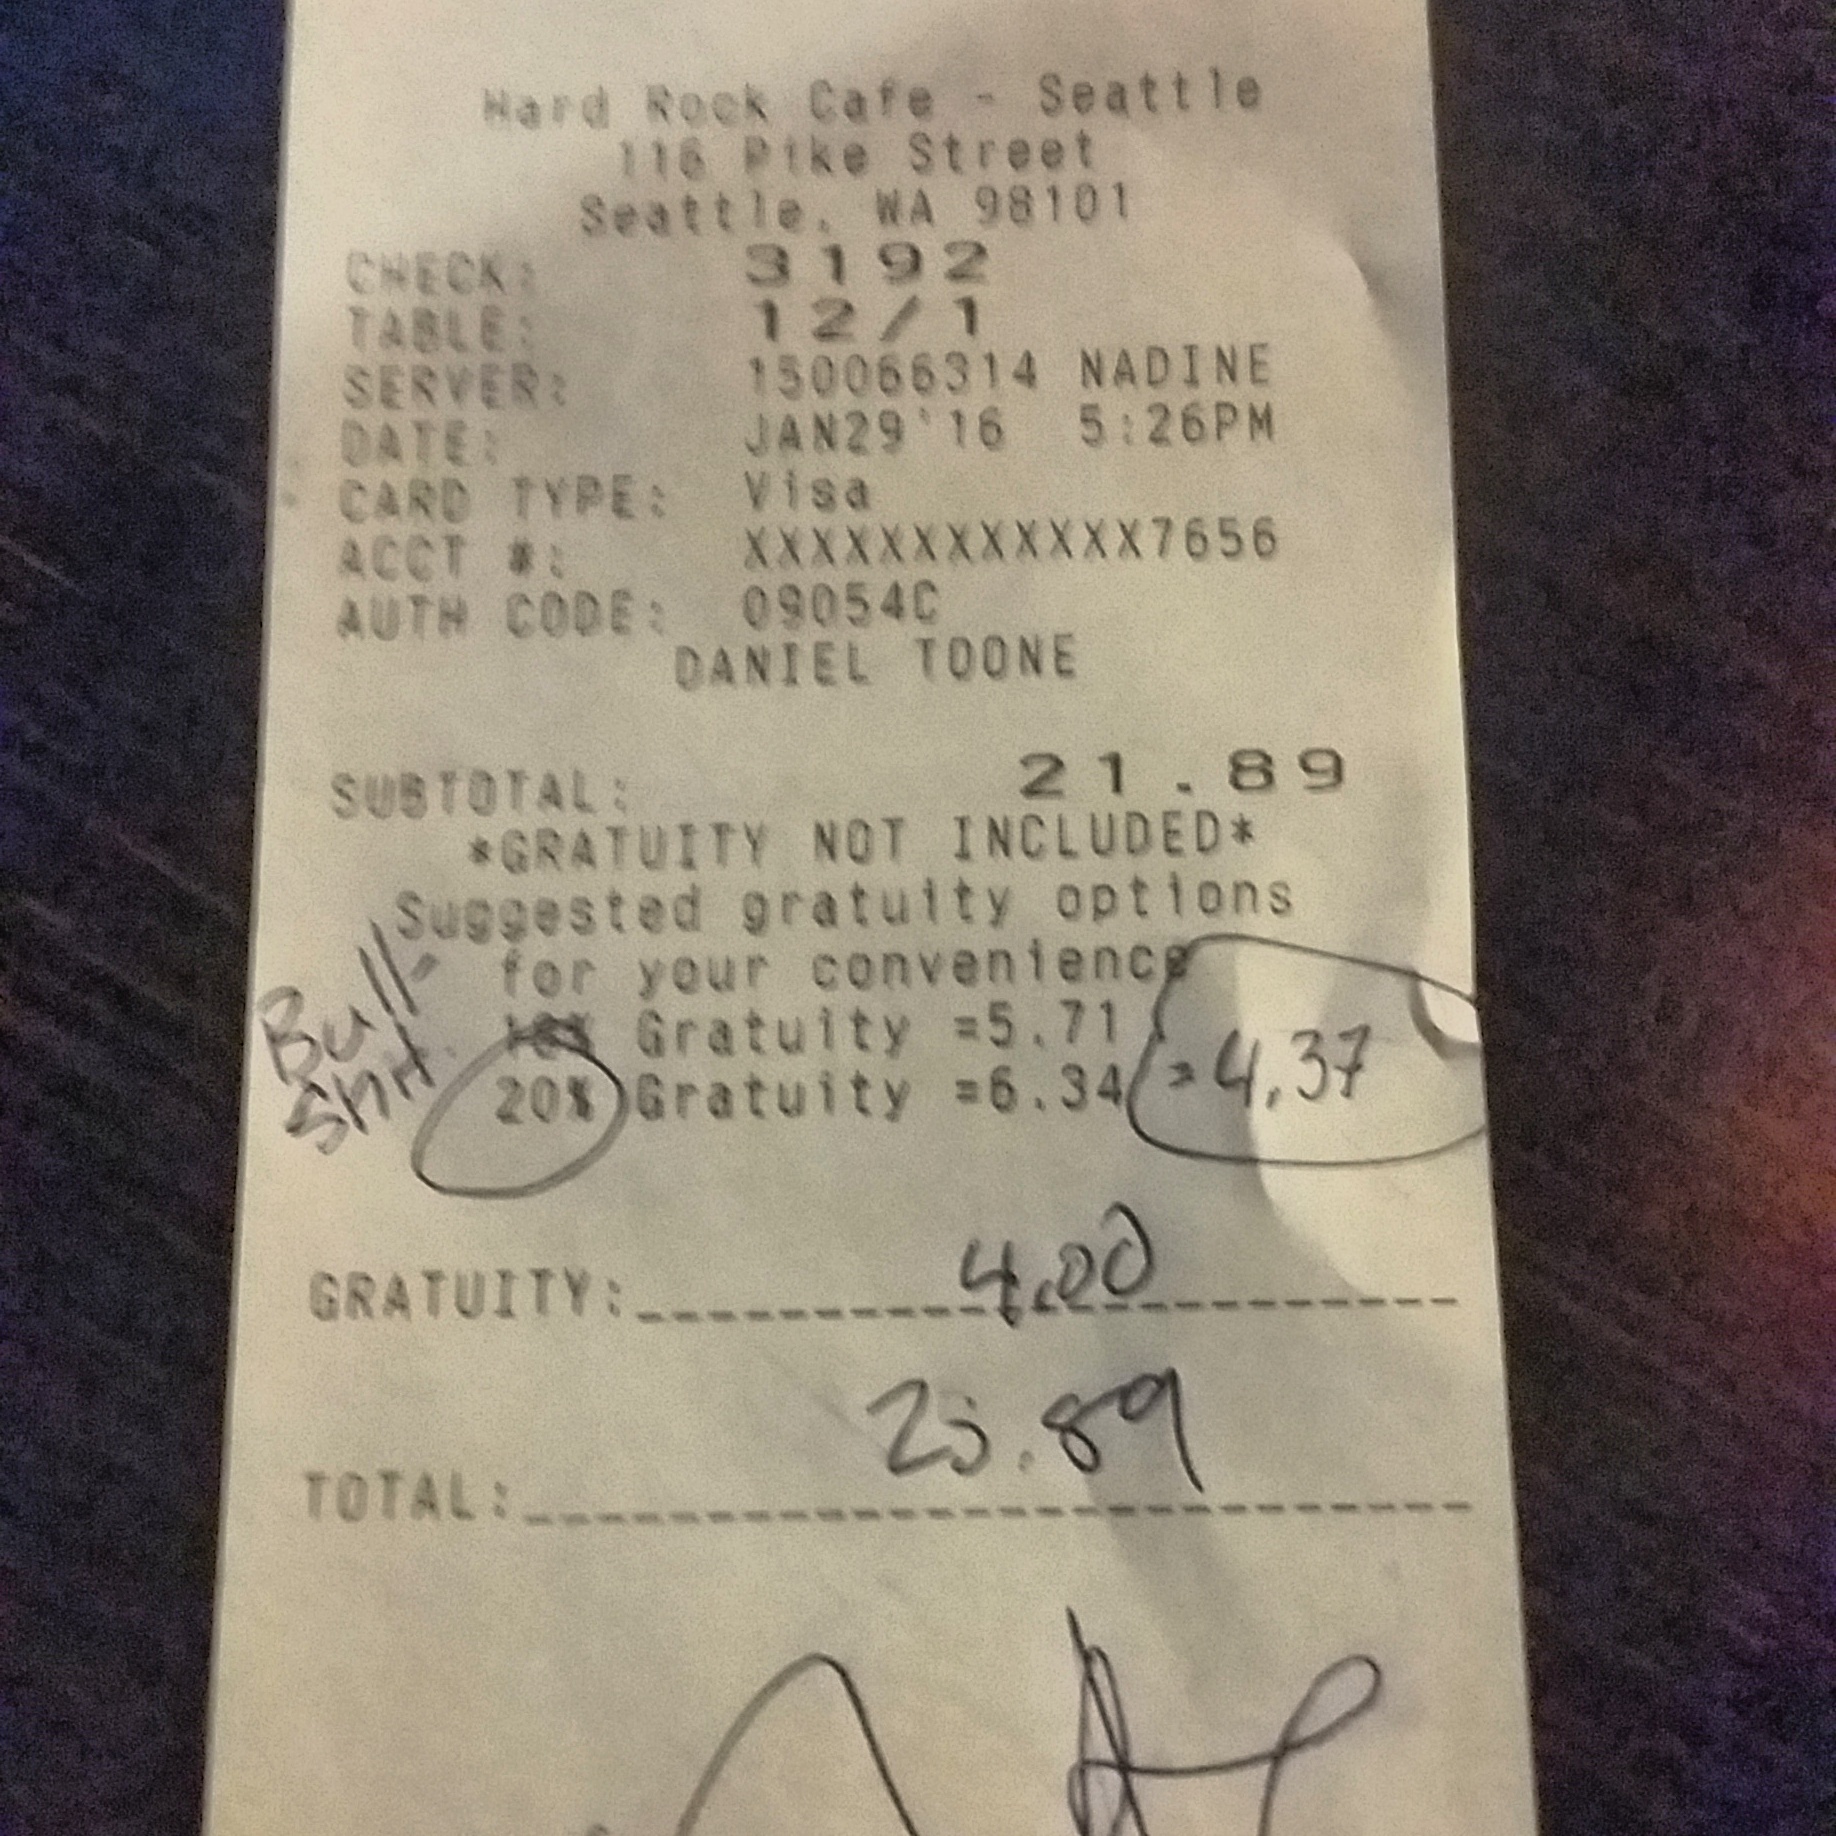 receipt - Hard Rock Cafe Seattle 118 Pike Street Seattle, Wa 98101 Check 3192 Table 121 Server 150066314 Nadine Date Pm Card Type Visa Acct XXXXXXXXXXXX7656 Auth Code 09054C Daniel Toone Subtotal 21.89 Gratuity Not Included Suggested gratuity options .. f